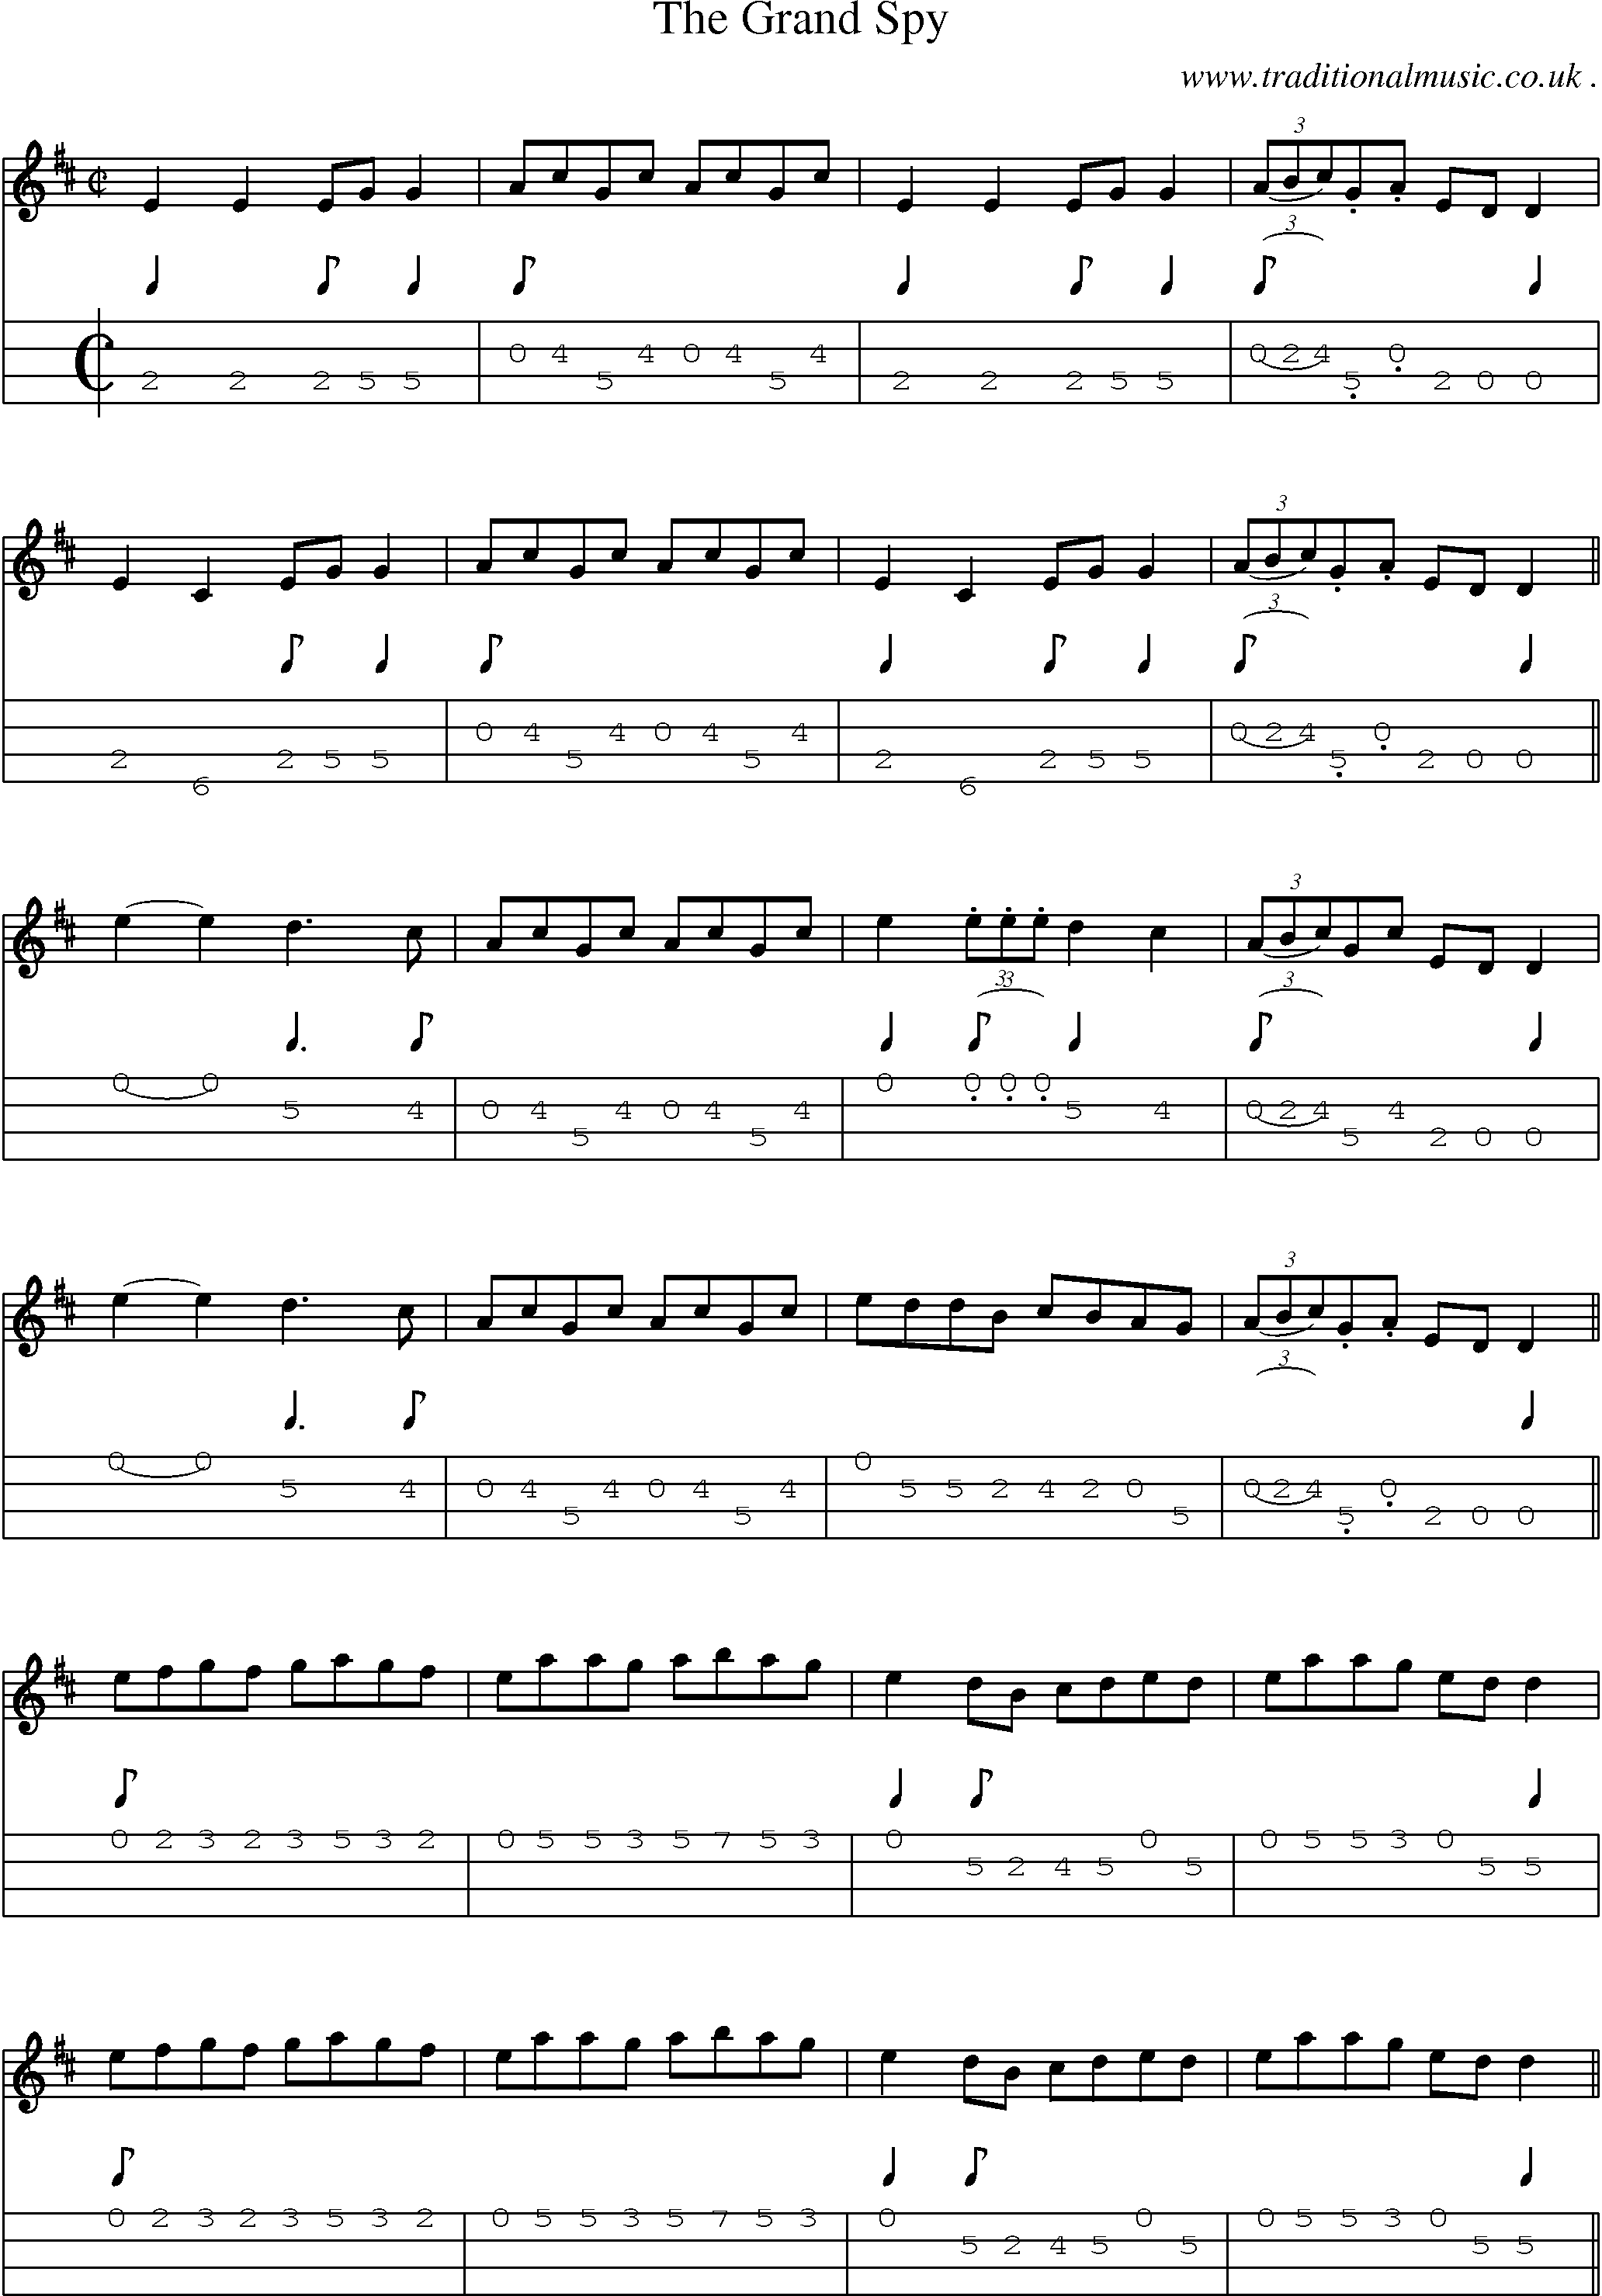 Sheet-Music and Mandolin Tabs for The Grand Spy